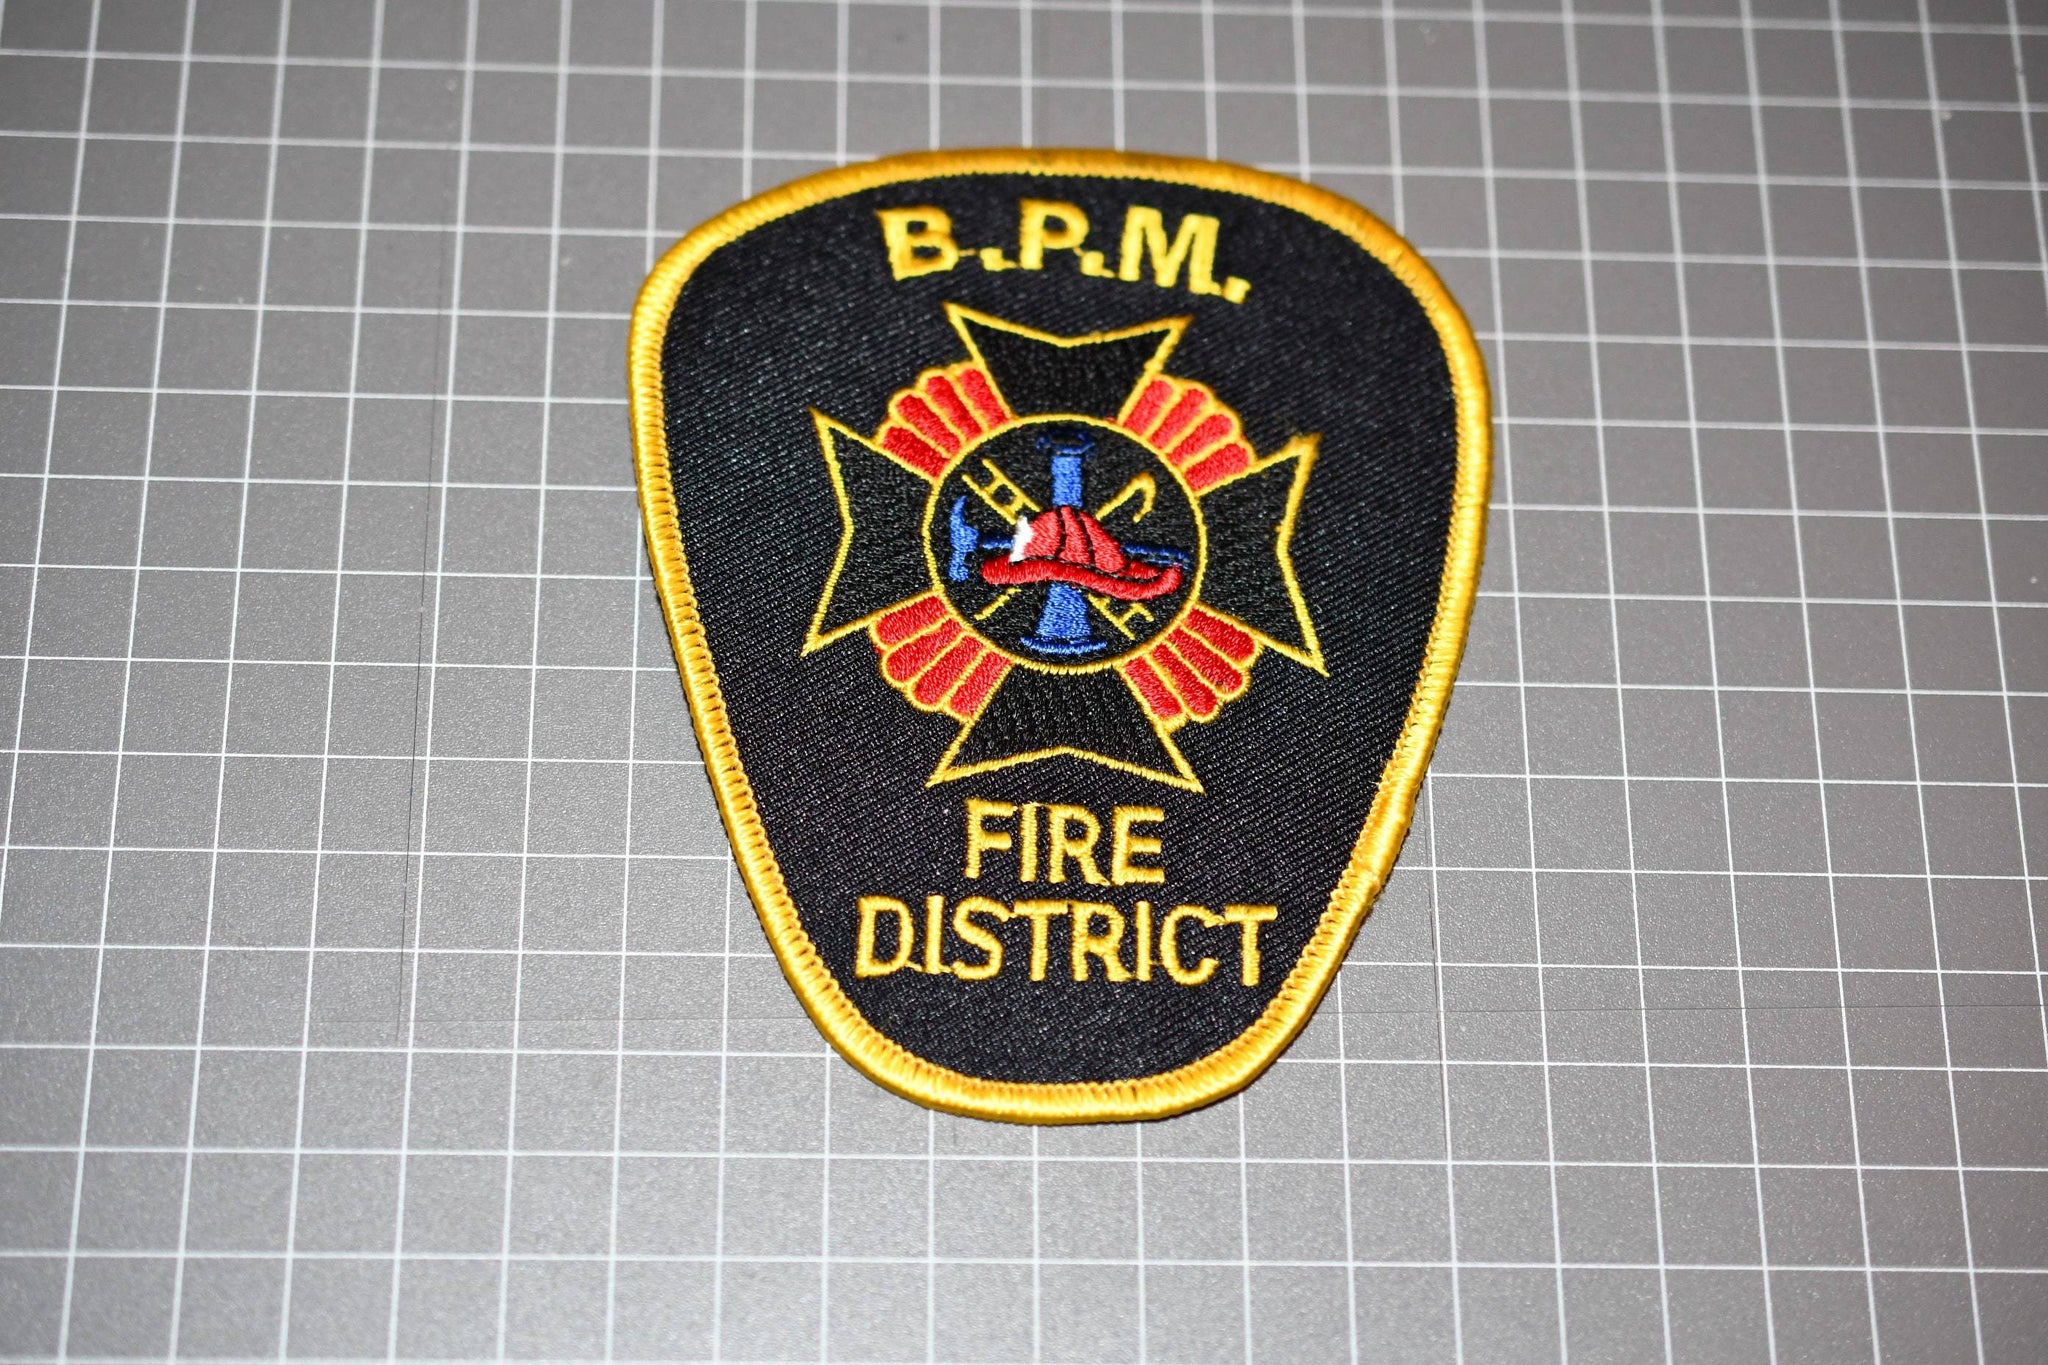 Bloomingburg Paint Marion Ohio Fire District Patch (B9)